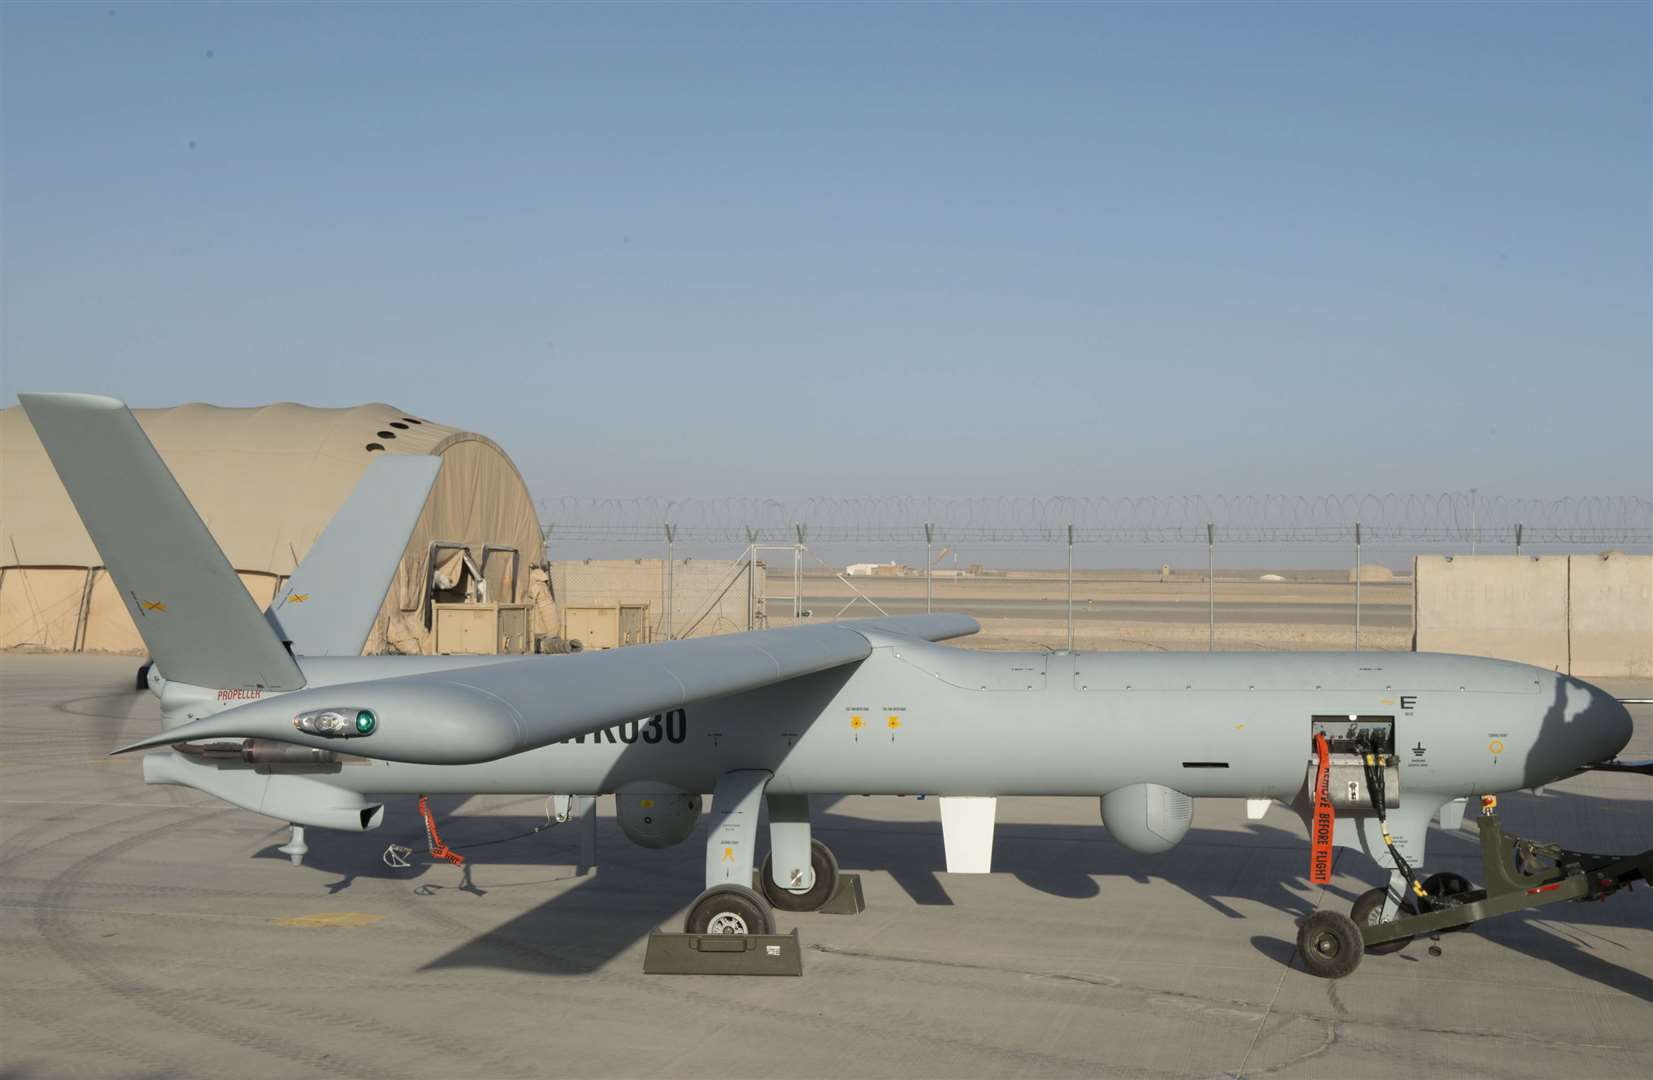 A Watchkeeper unmanned aerial vehicle (UAV) at Camp Bastion, Afghanistan (MoD)